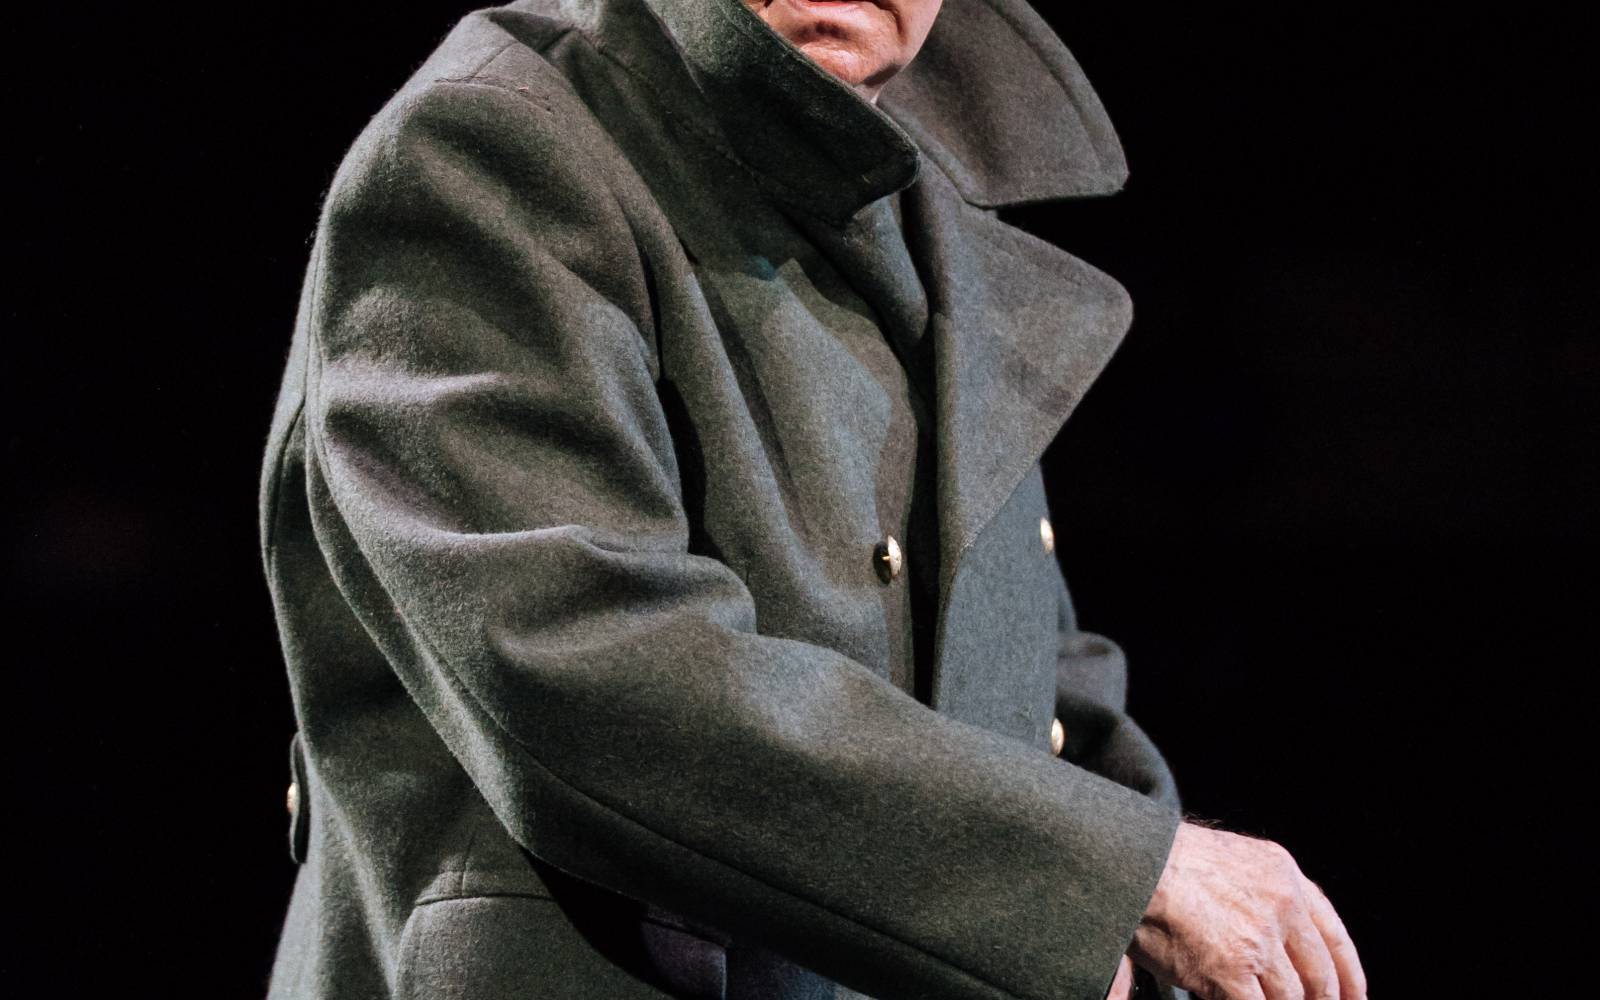 An old man, wearing a coat with the collar turned up, looks behind him, concerned